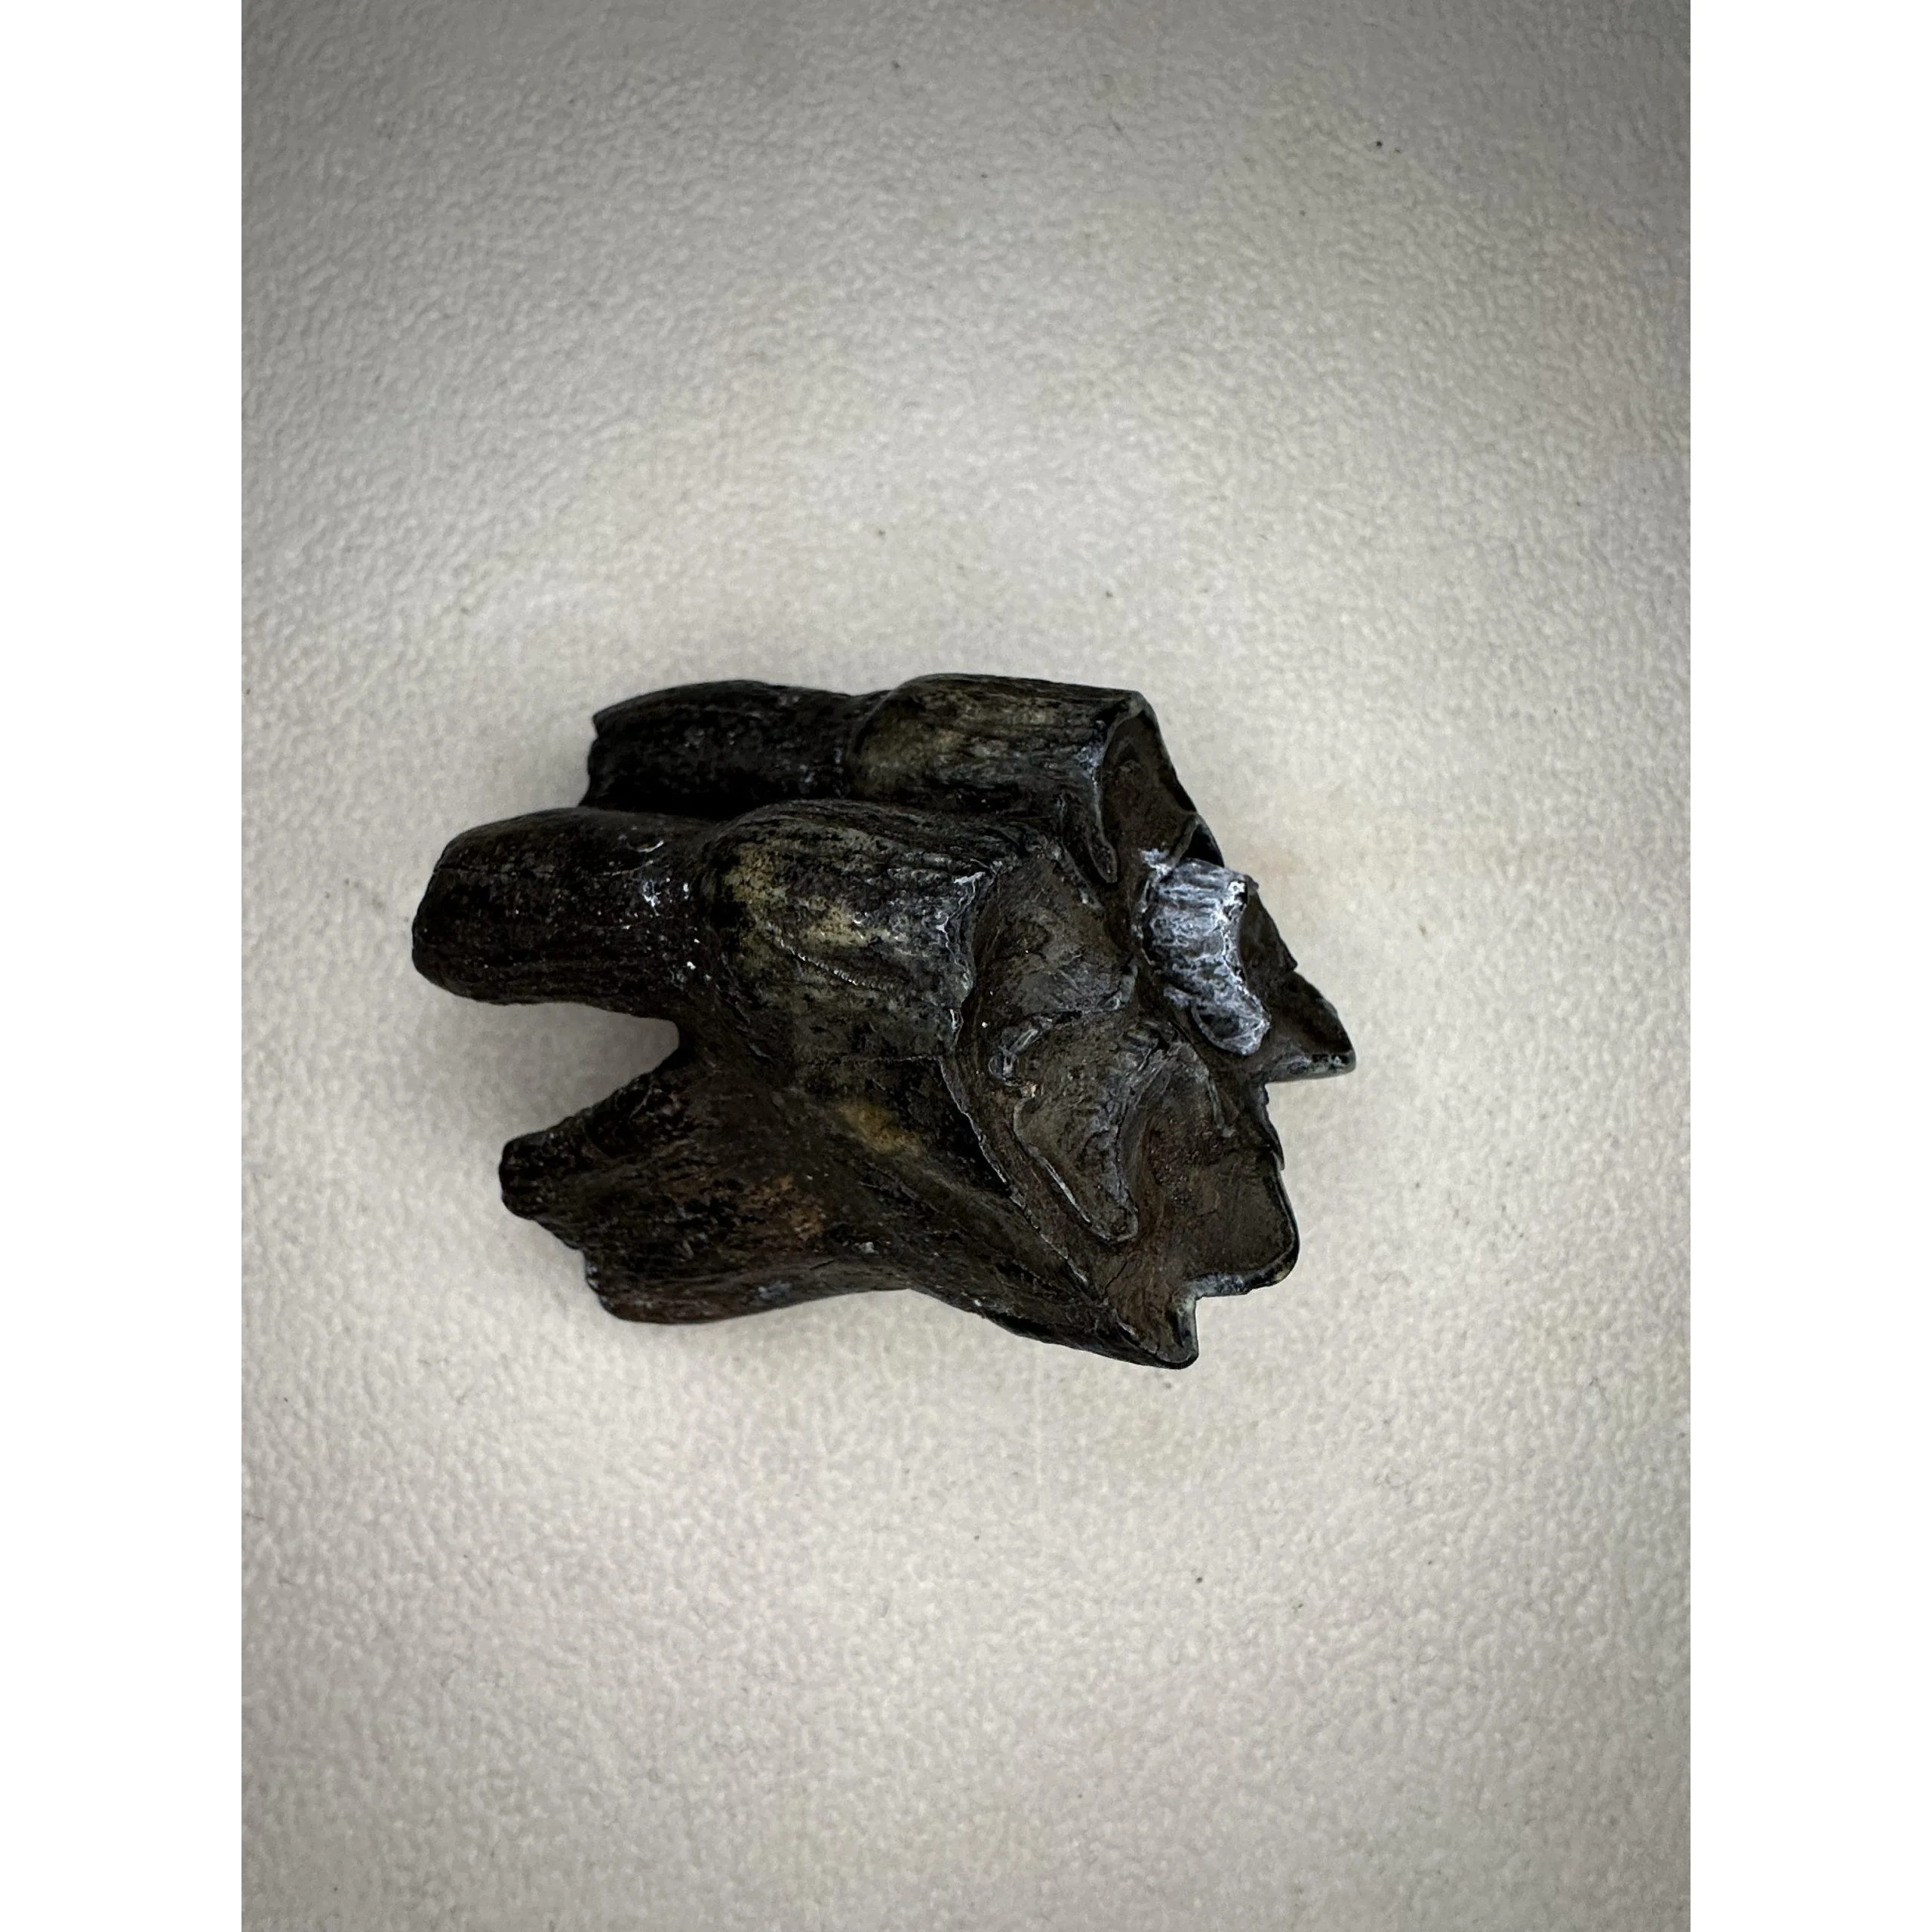 Fossil Bison Tooth – Florida, AAA grade full root Prehistoric Online